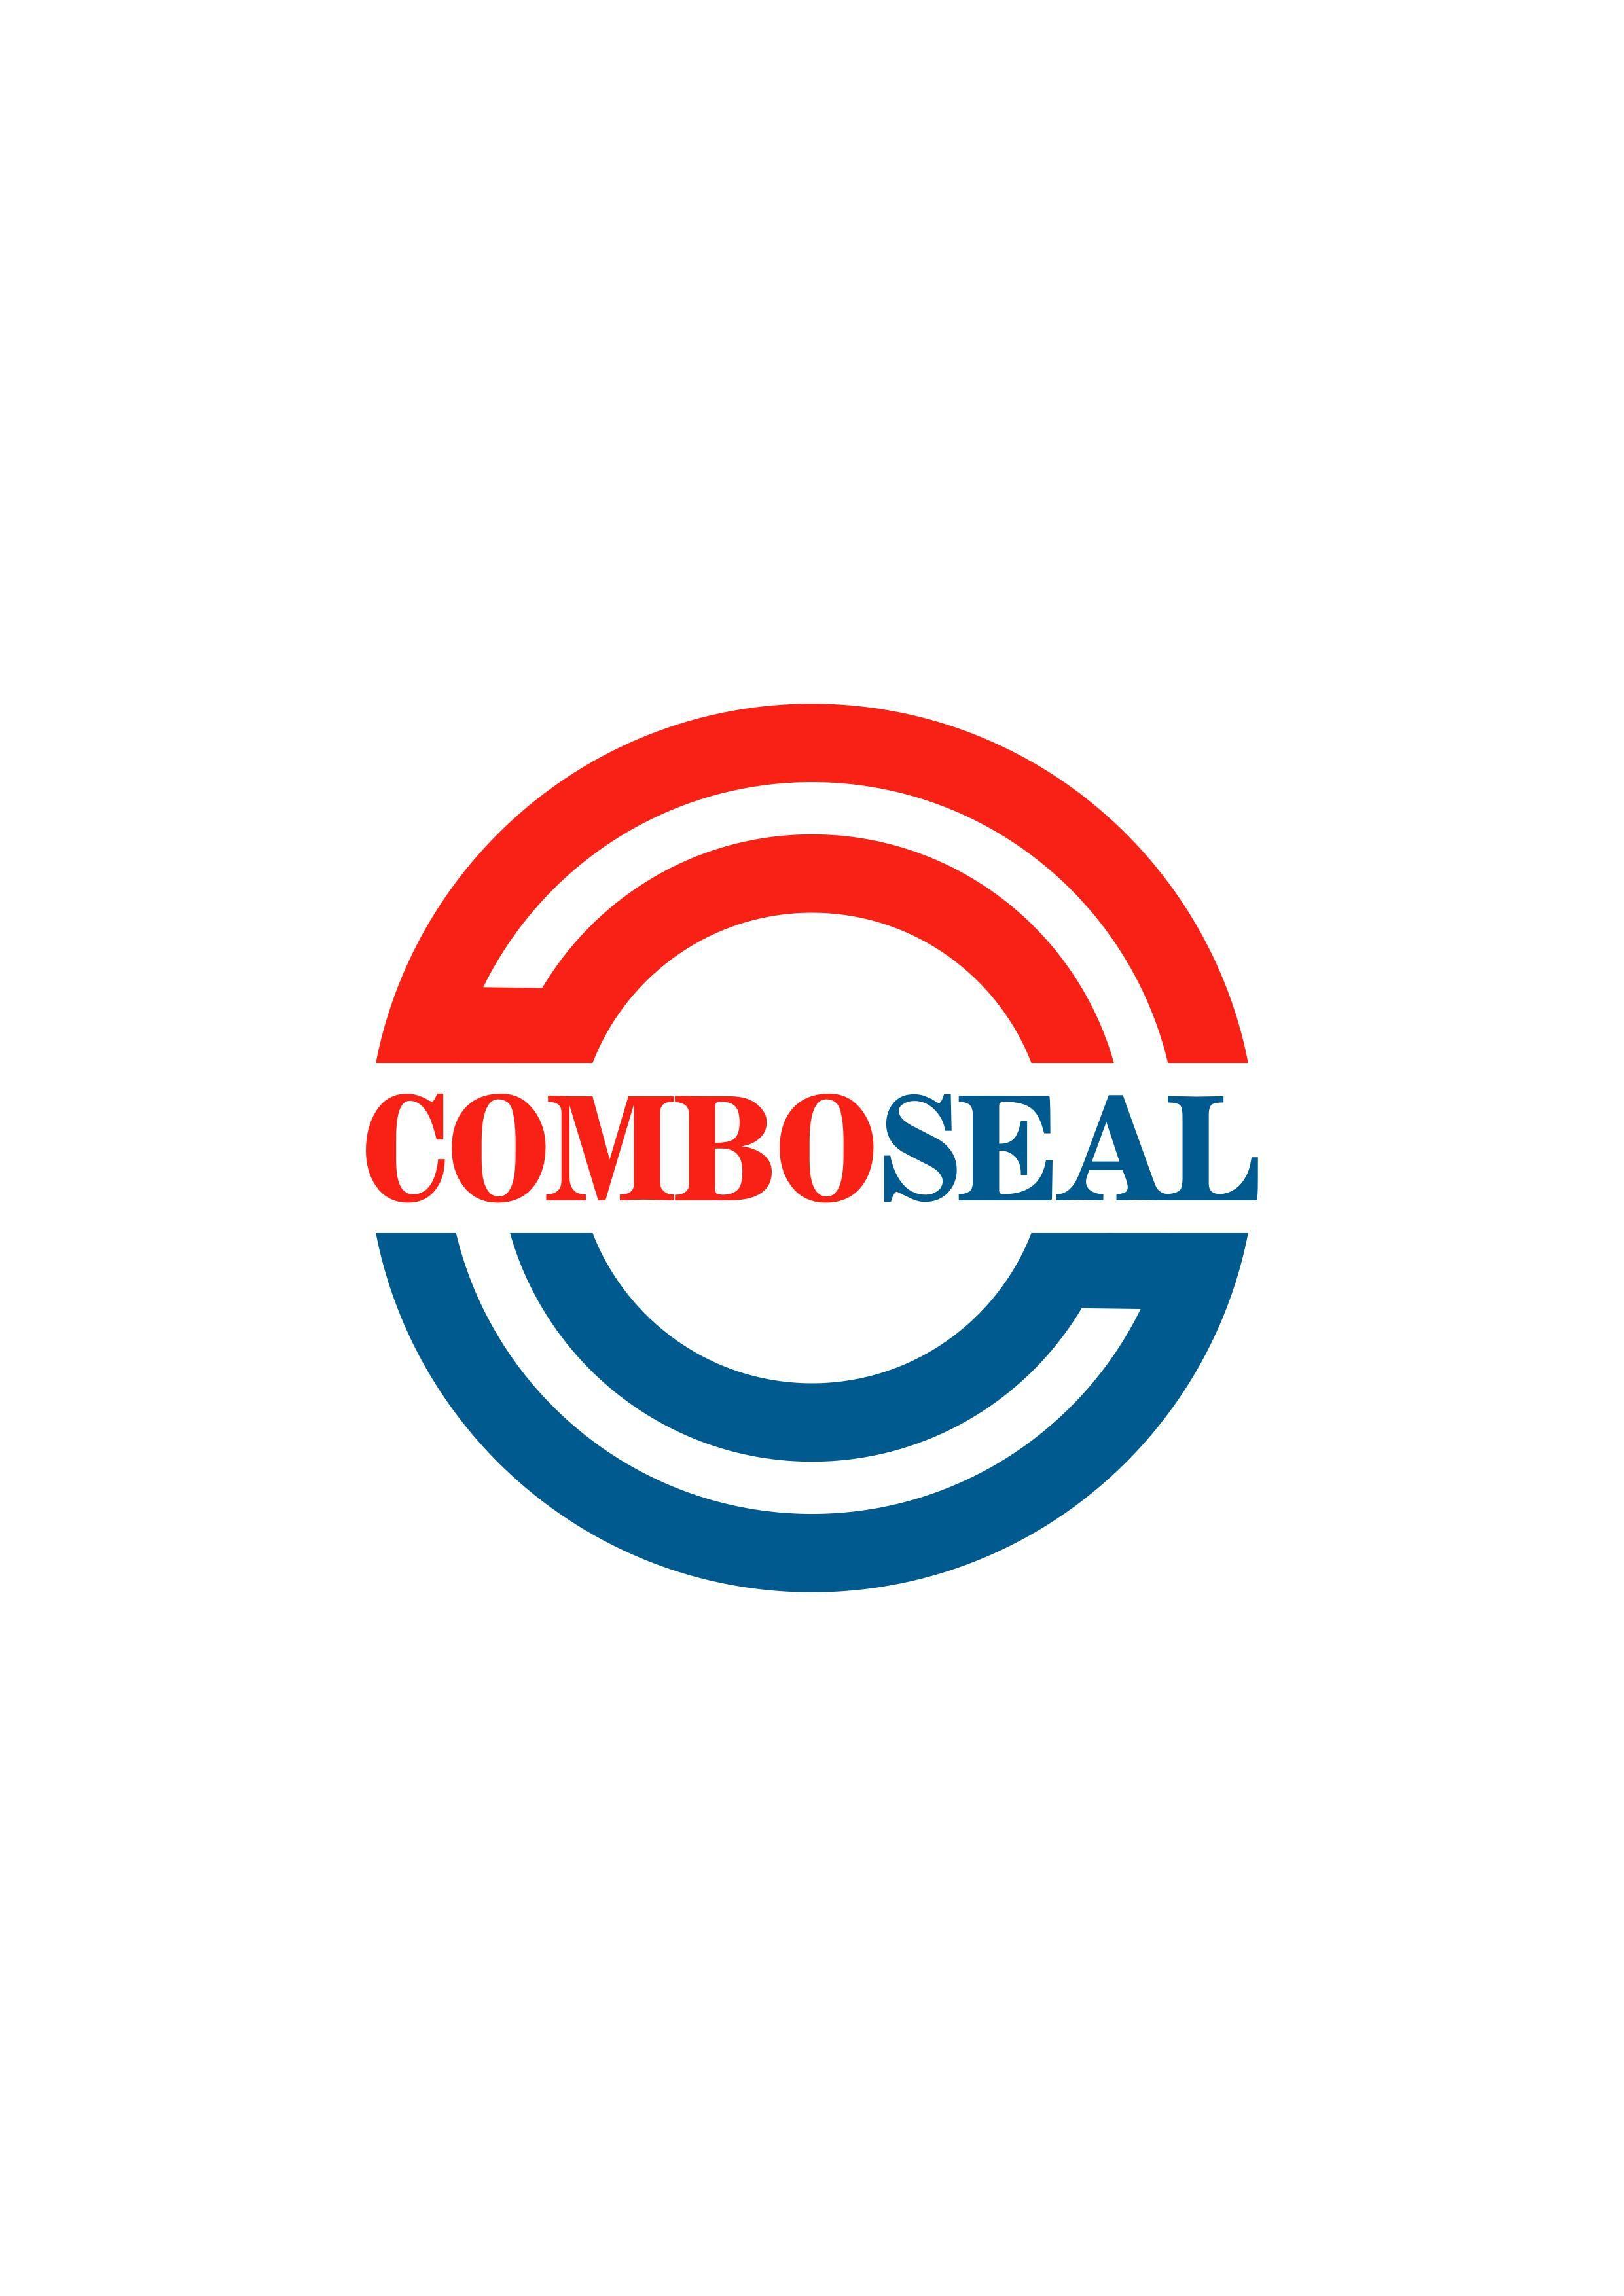 COMBOSEAL INDUSTRIES PRIVATE LIMITED